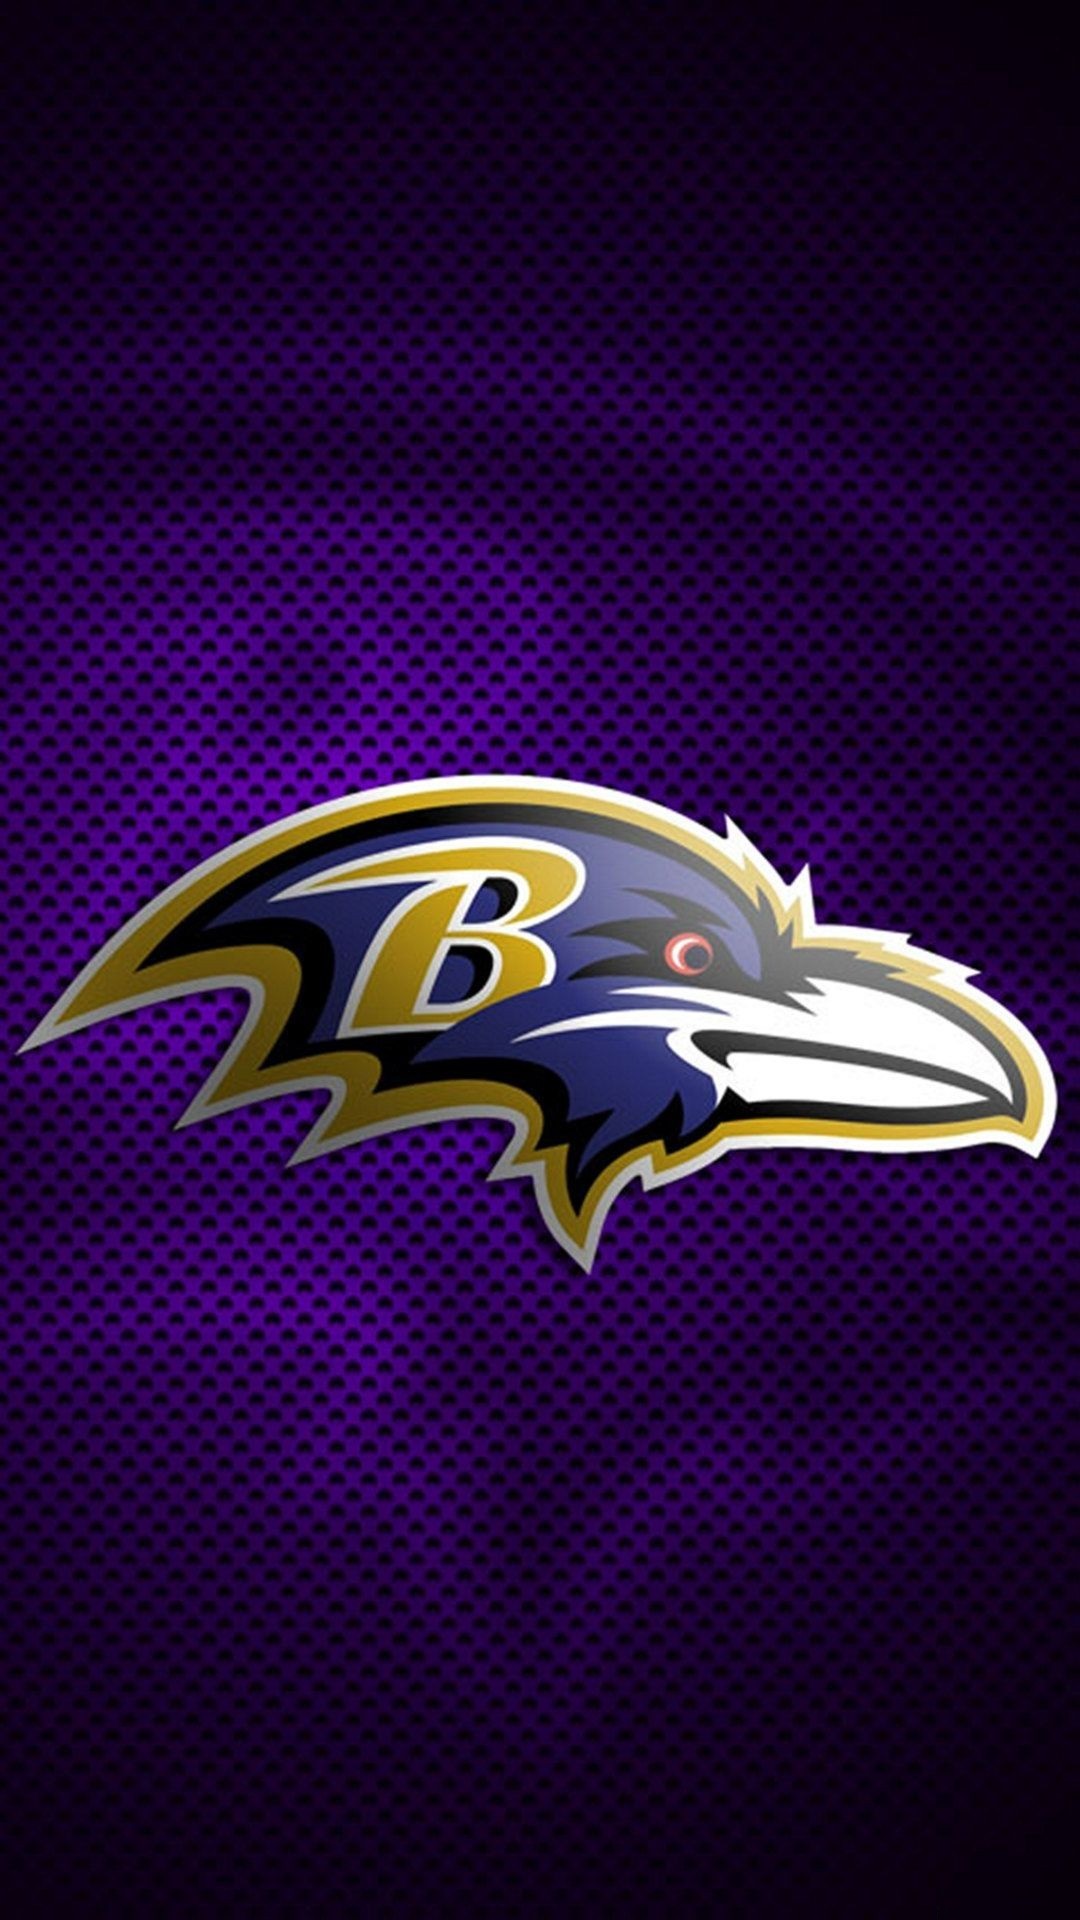 iPhone Wallpaper HD Baltimore Ravens With high-resolution 1080X1920 pixel. You can use this wallpaper for your Mac or Windows Desktop Background, iPhone, Android or Tablet and another Smartphone device